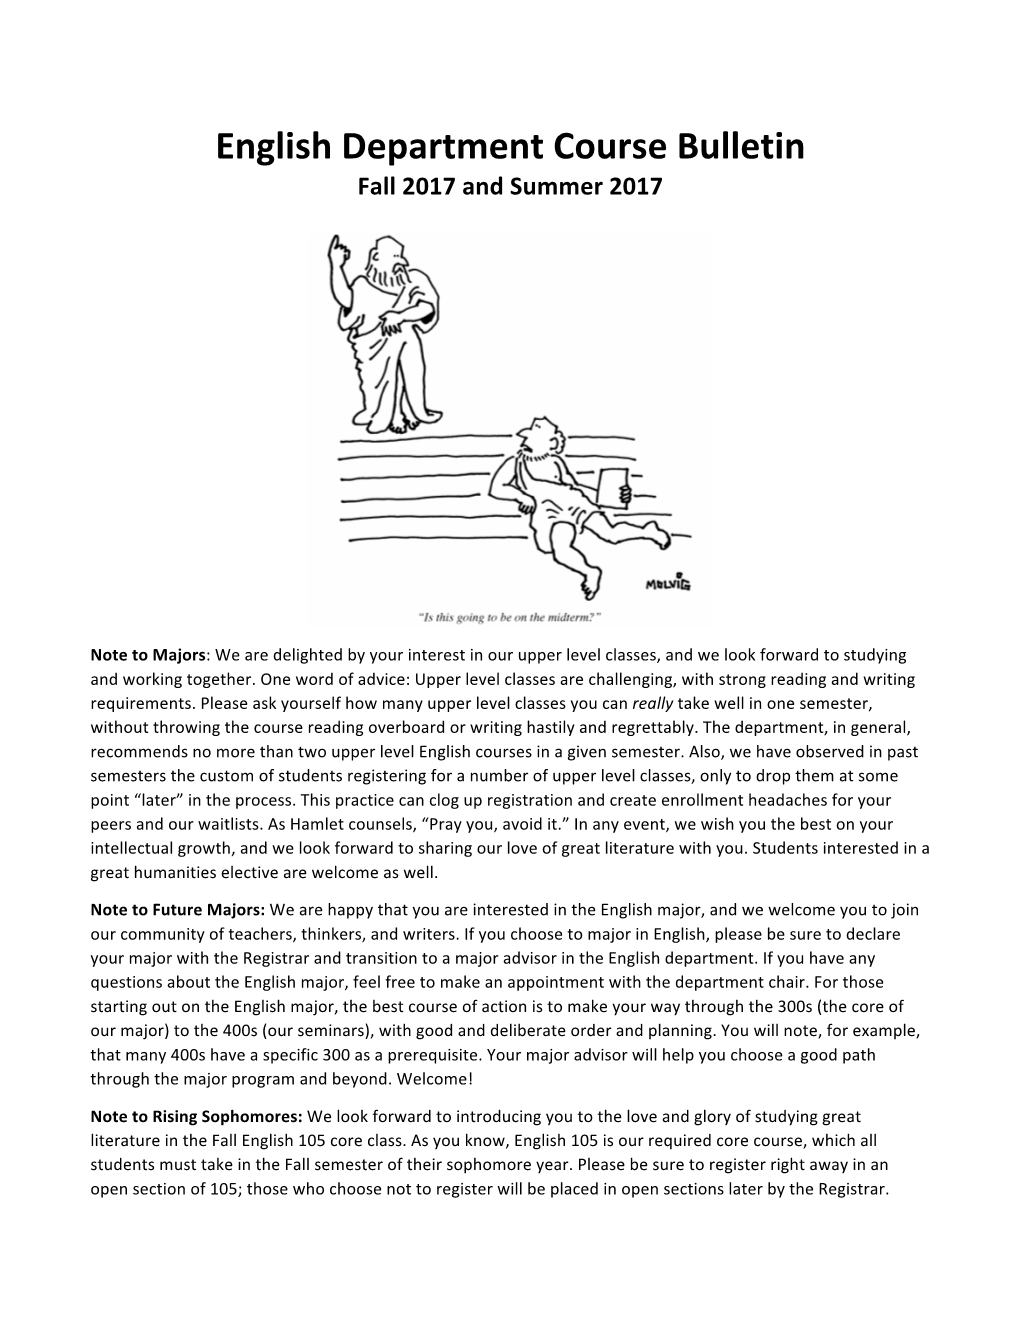 Course Bulletin Fall 2017 and Summer 2017